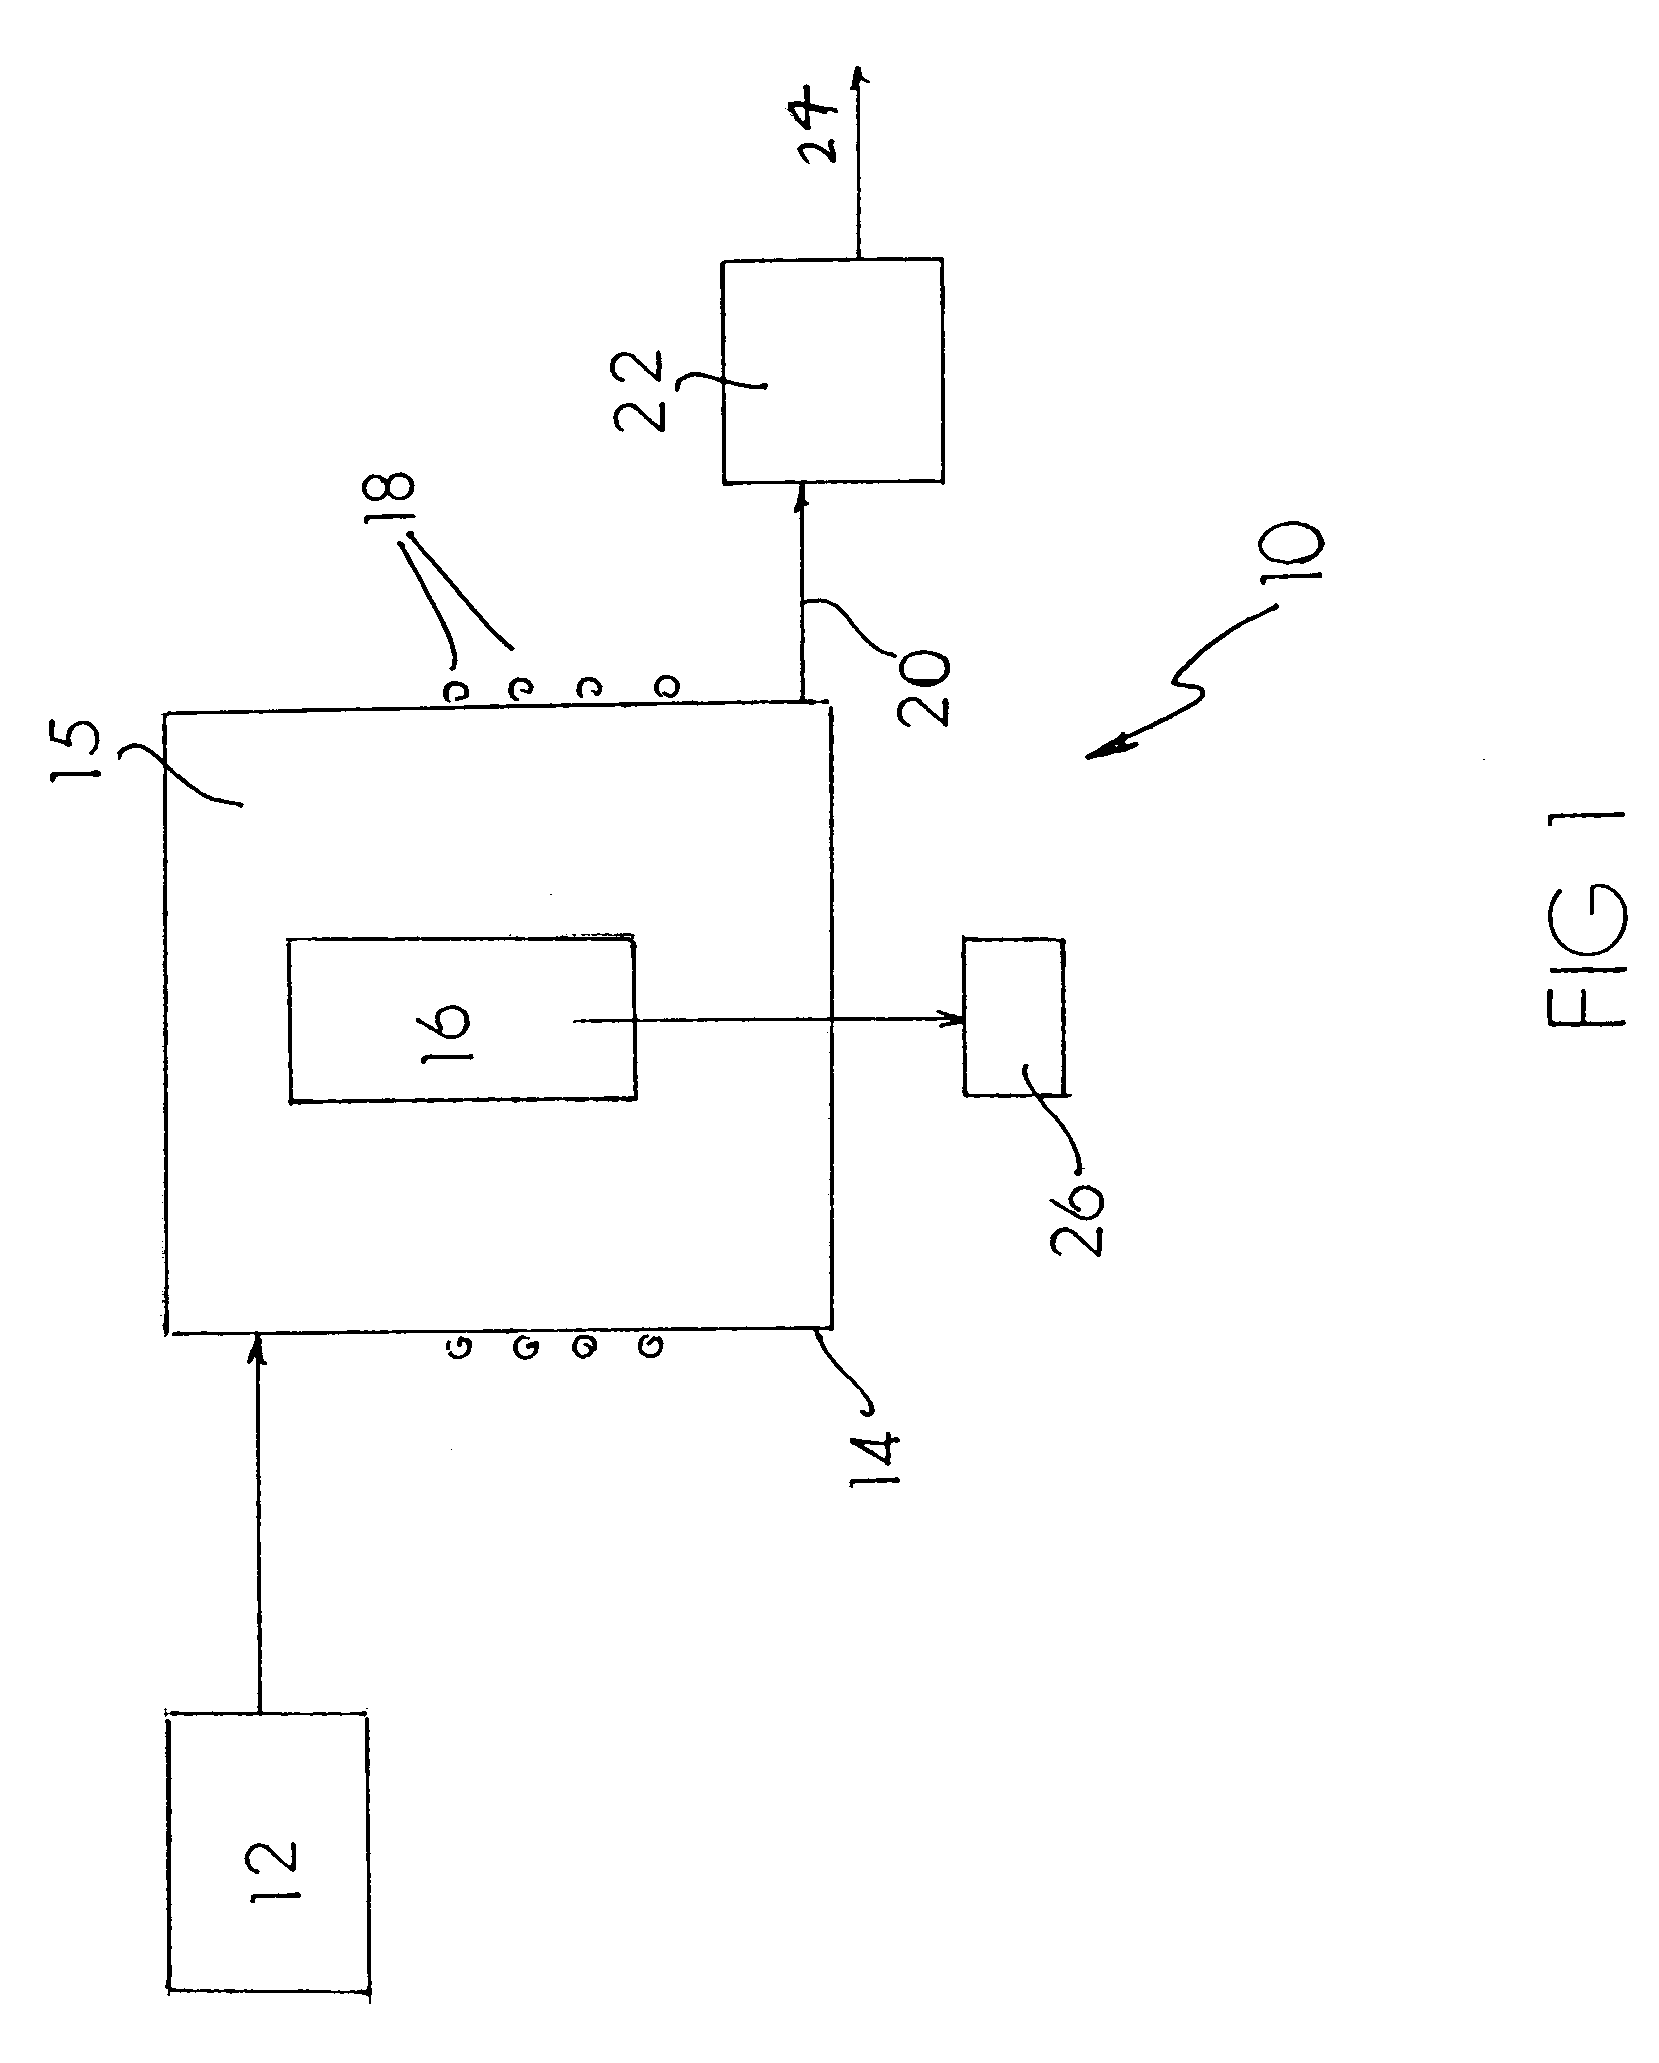 Method for high temperature mercury capture from gas streams